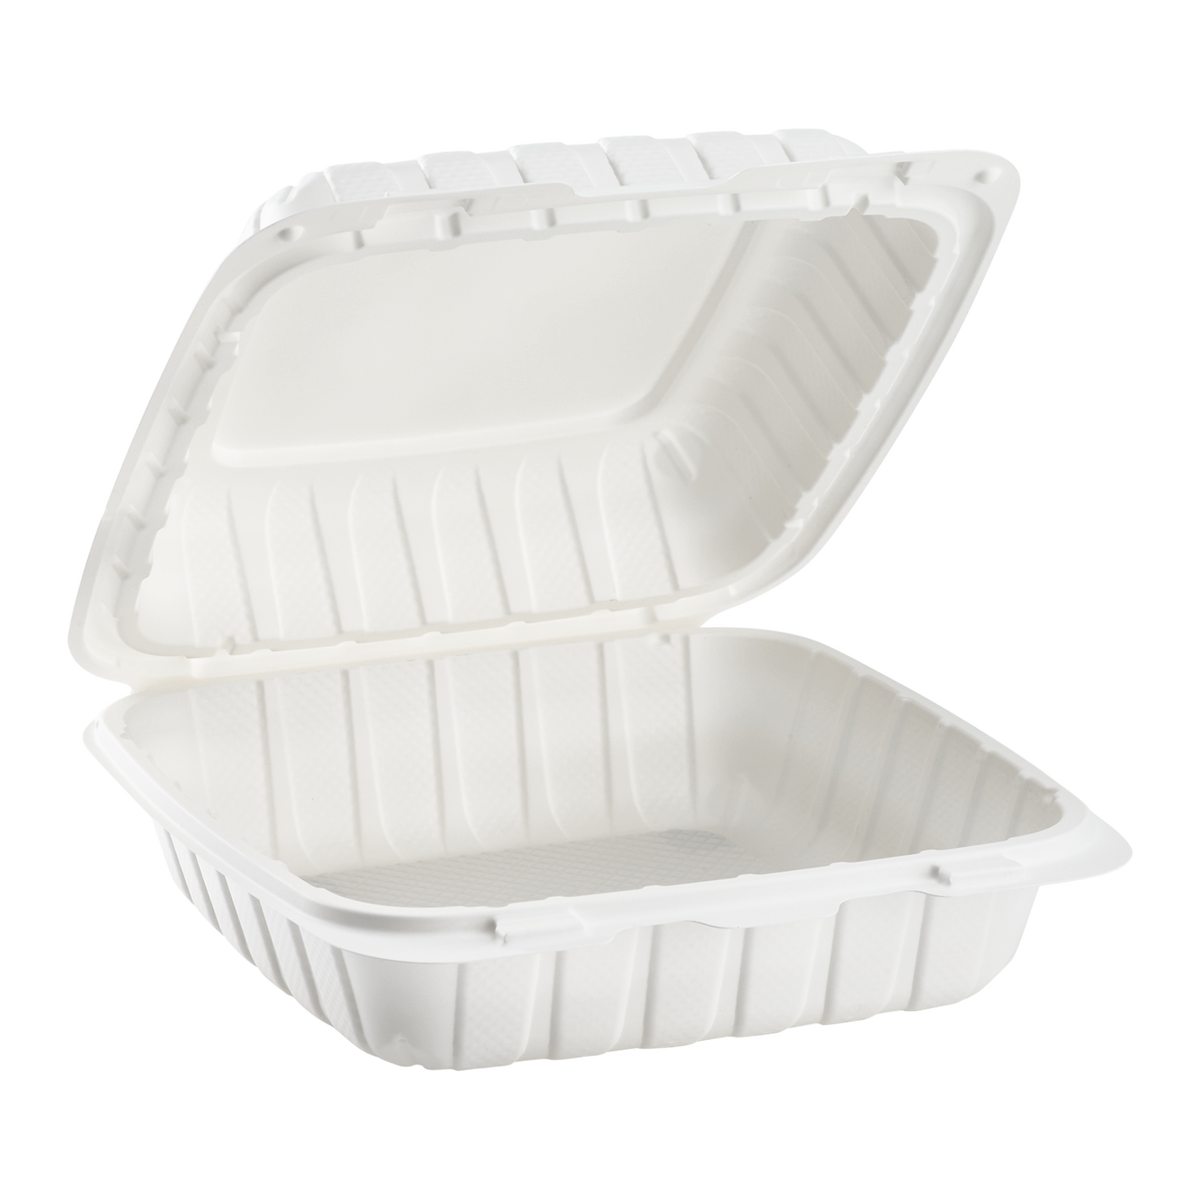 Materials for Take-Out Boxes and To-Go Containers - Richmond Advantage